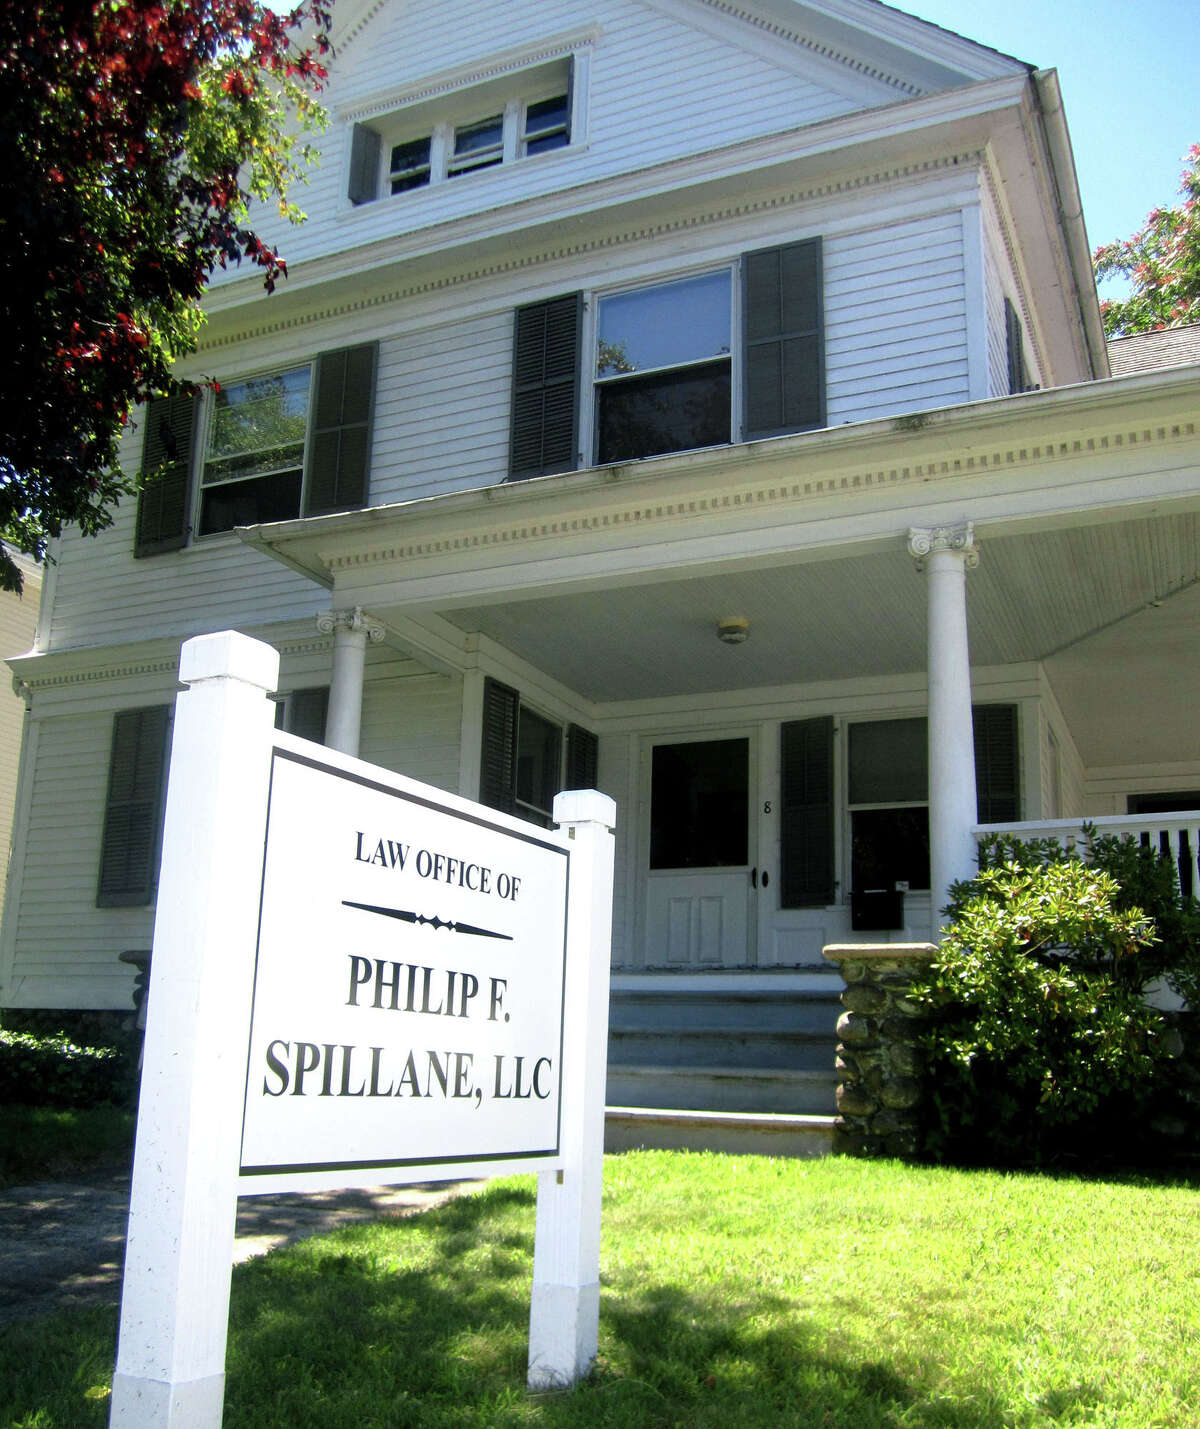 The Law Office of Phllip F. Spillane at 8 South Main Street is just a two-minute walk from the Village Green in New Milford. August 2013